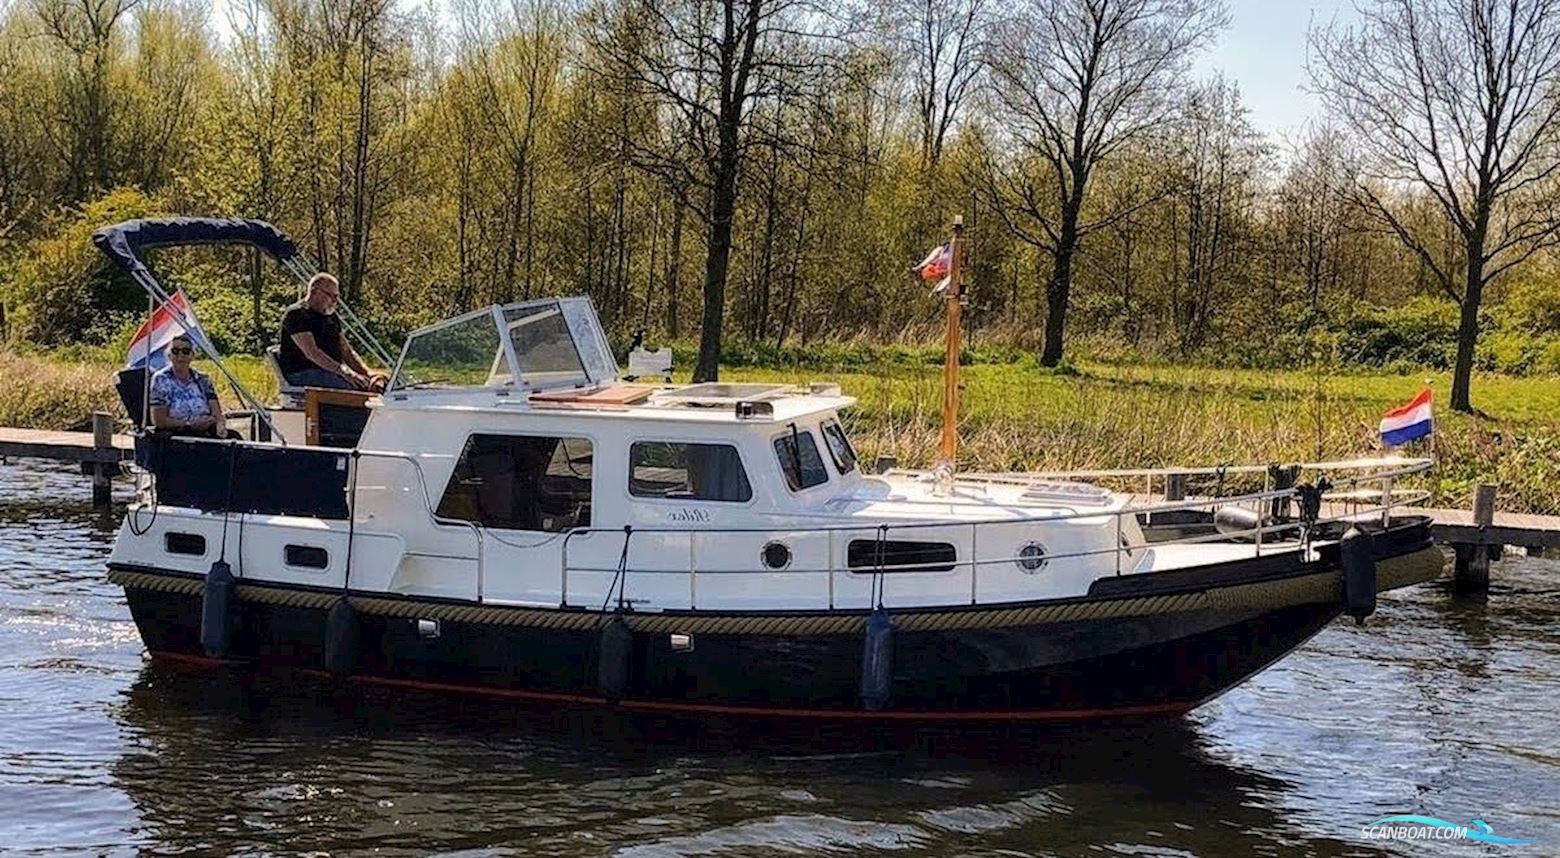 Duet Vlet 900 AK Motor boat 2000, with New Holland engine, The Netherlands